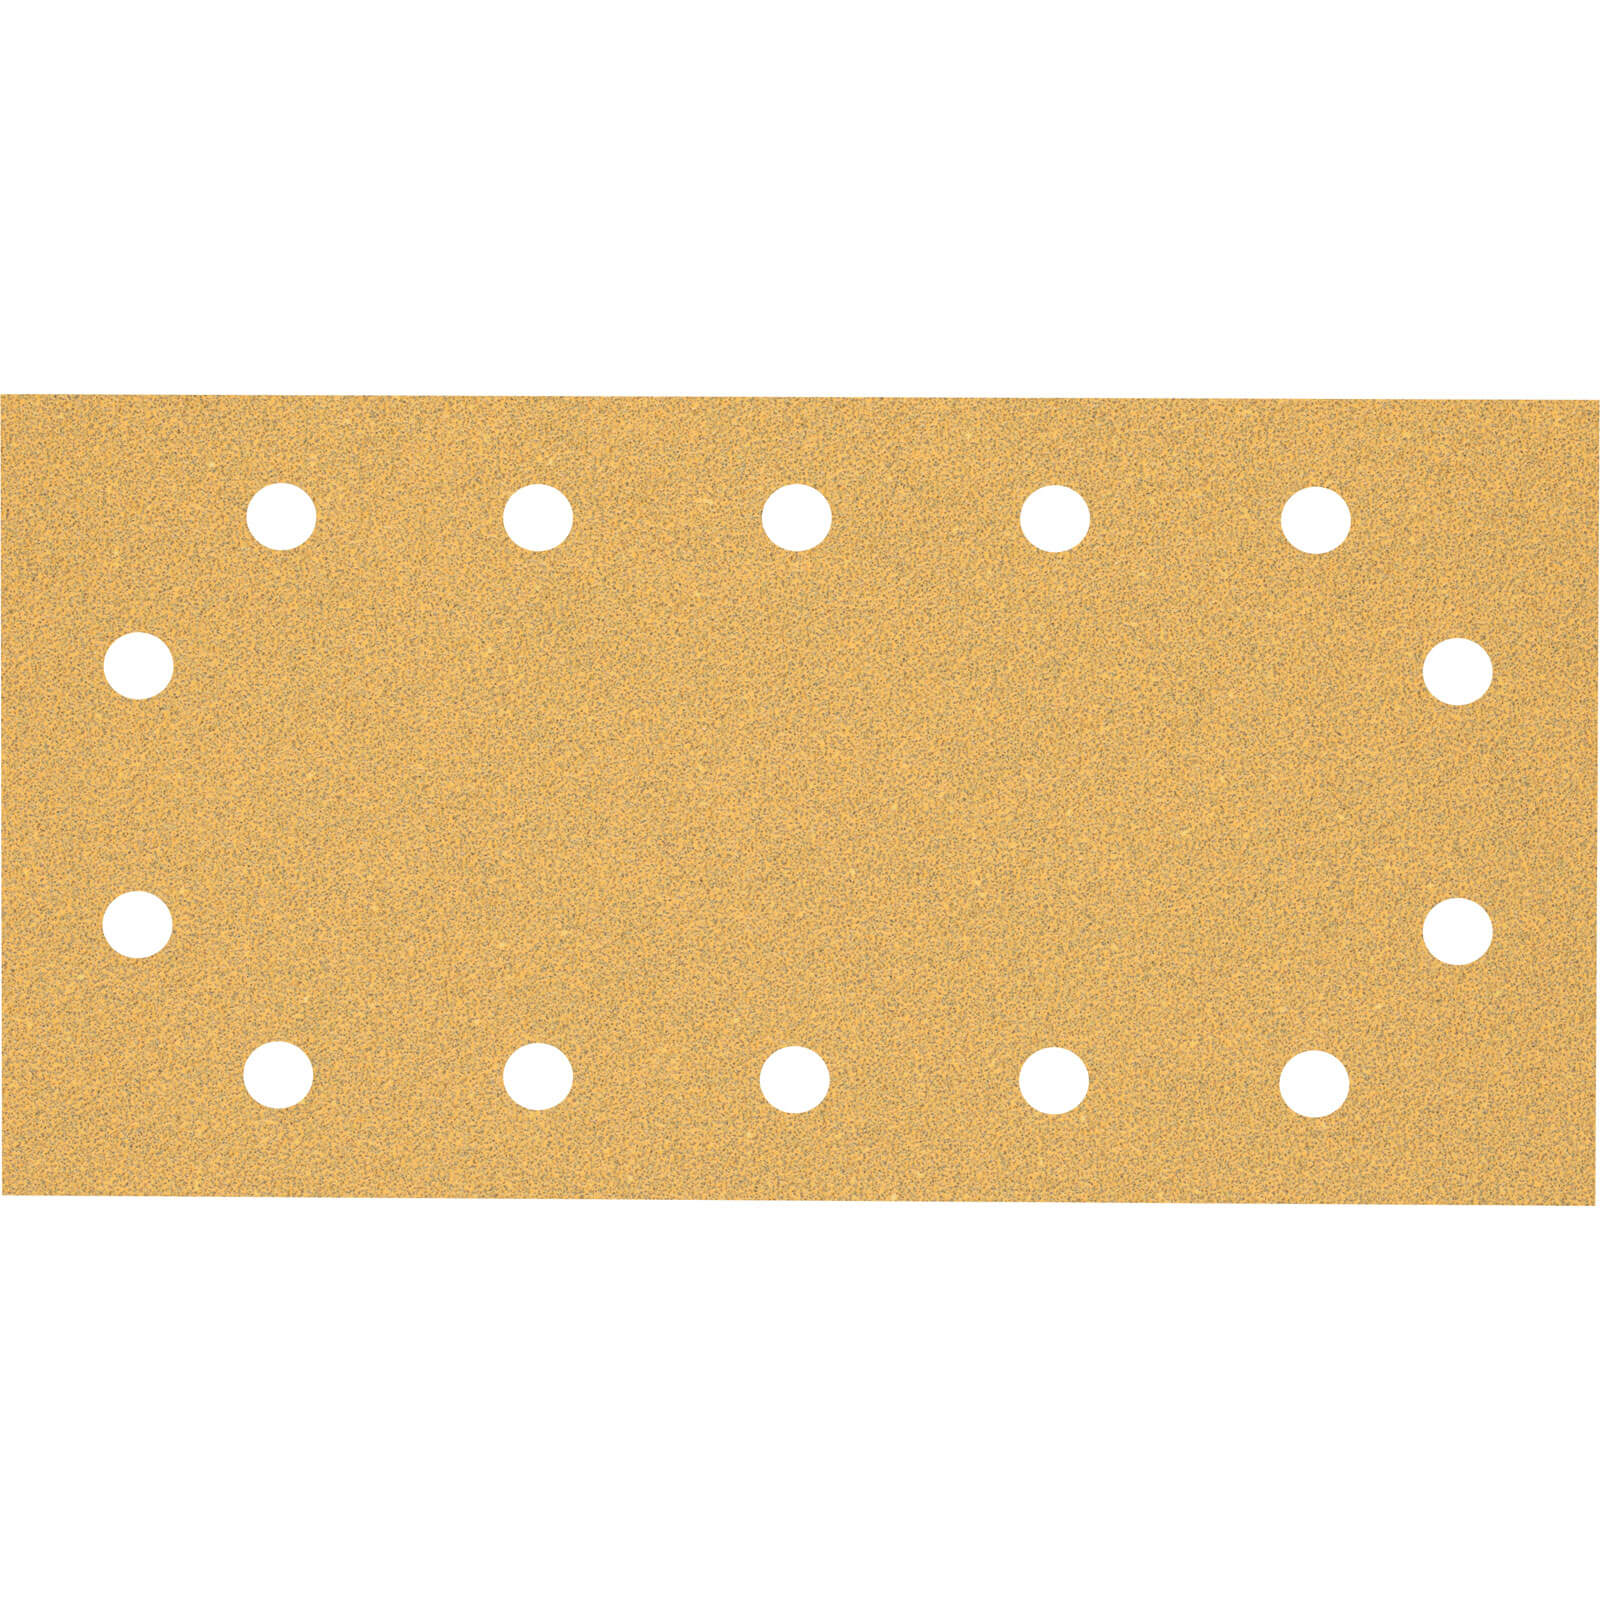 Image of Bosch Expert C470 Punched Hook and Loop 1/2 Sanding Sheets 115mm x 230mm 60g Pack of 50